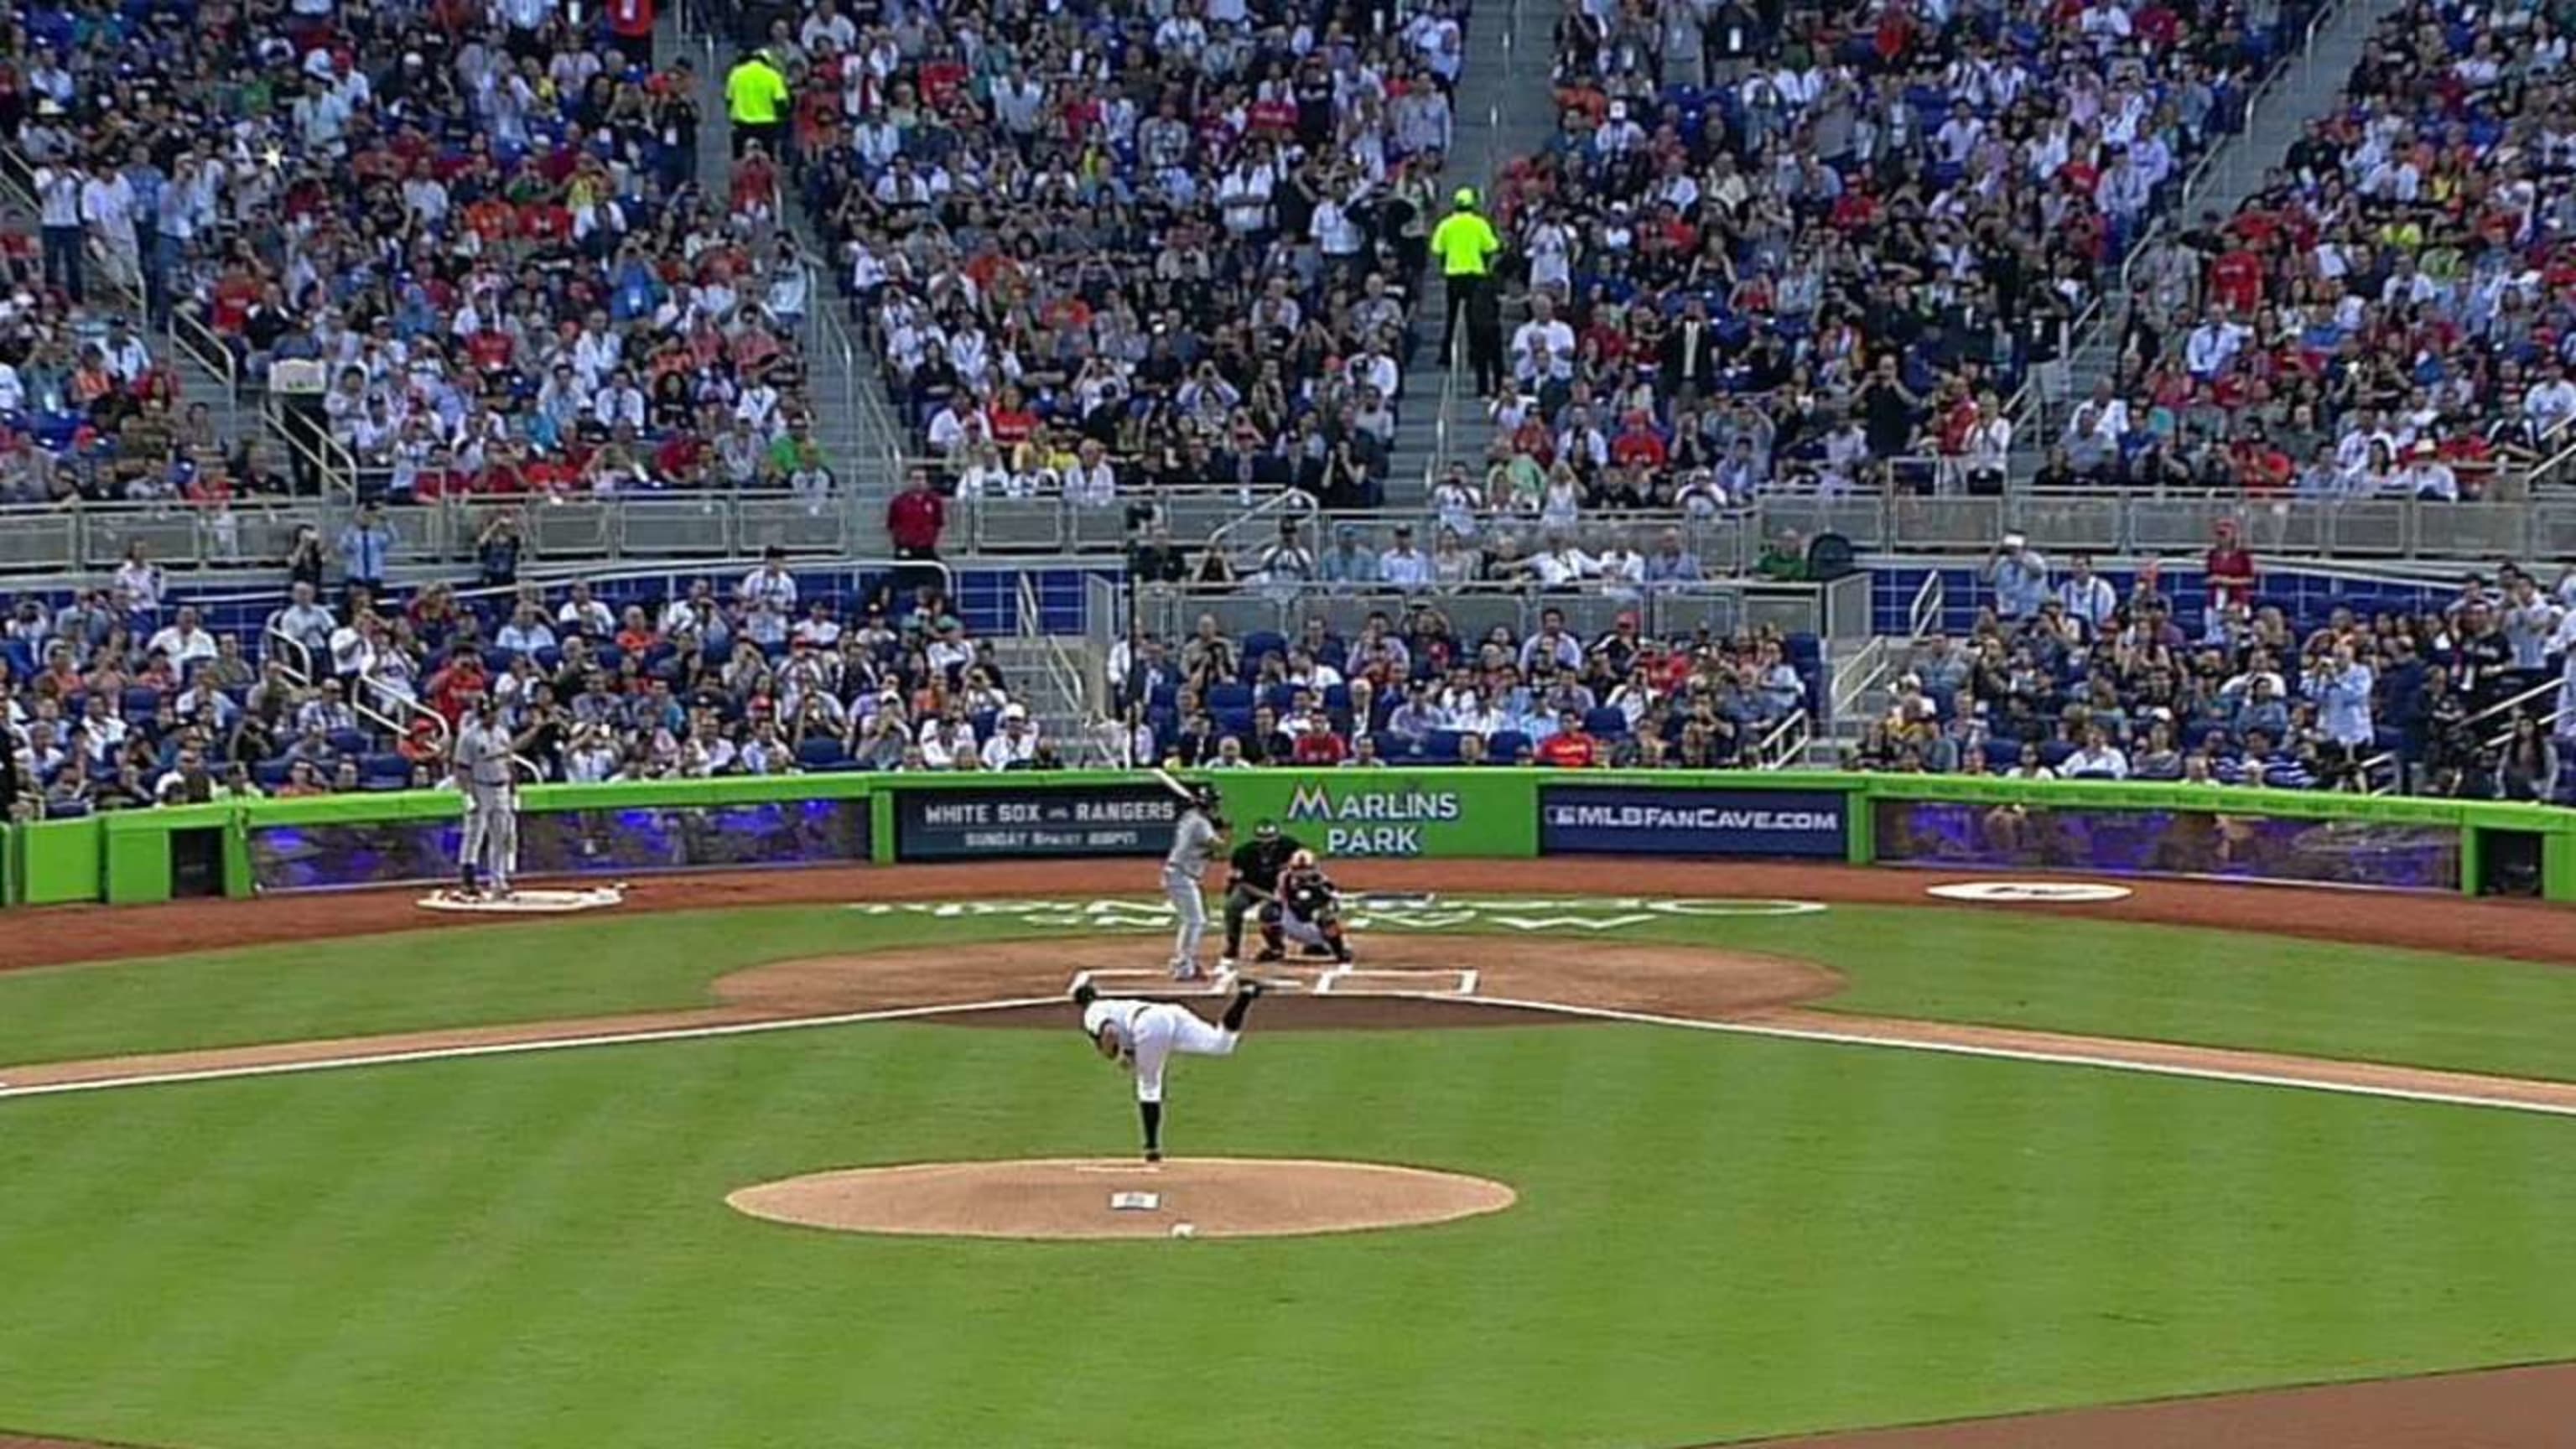 The greatest Opening Day in Miami Marlins history